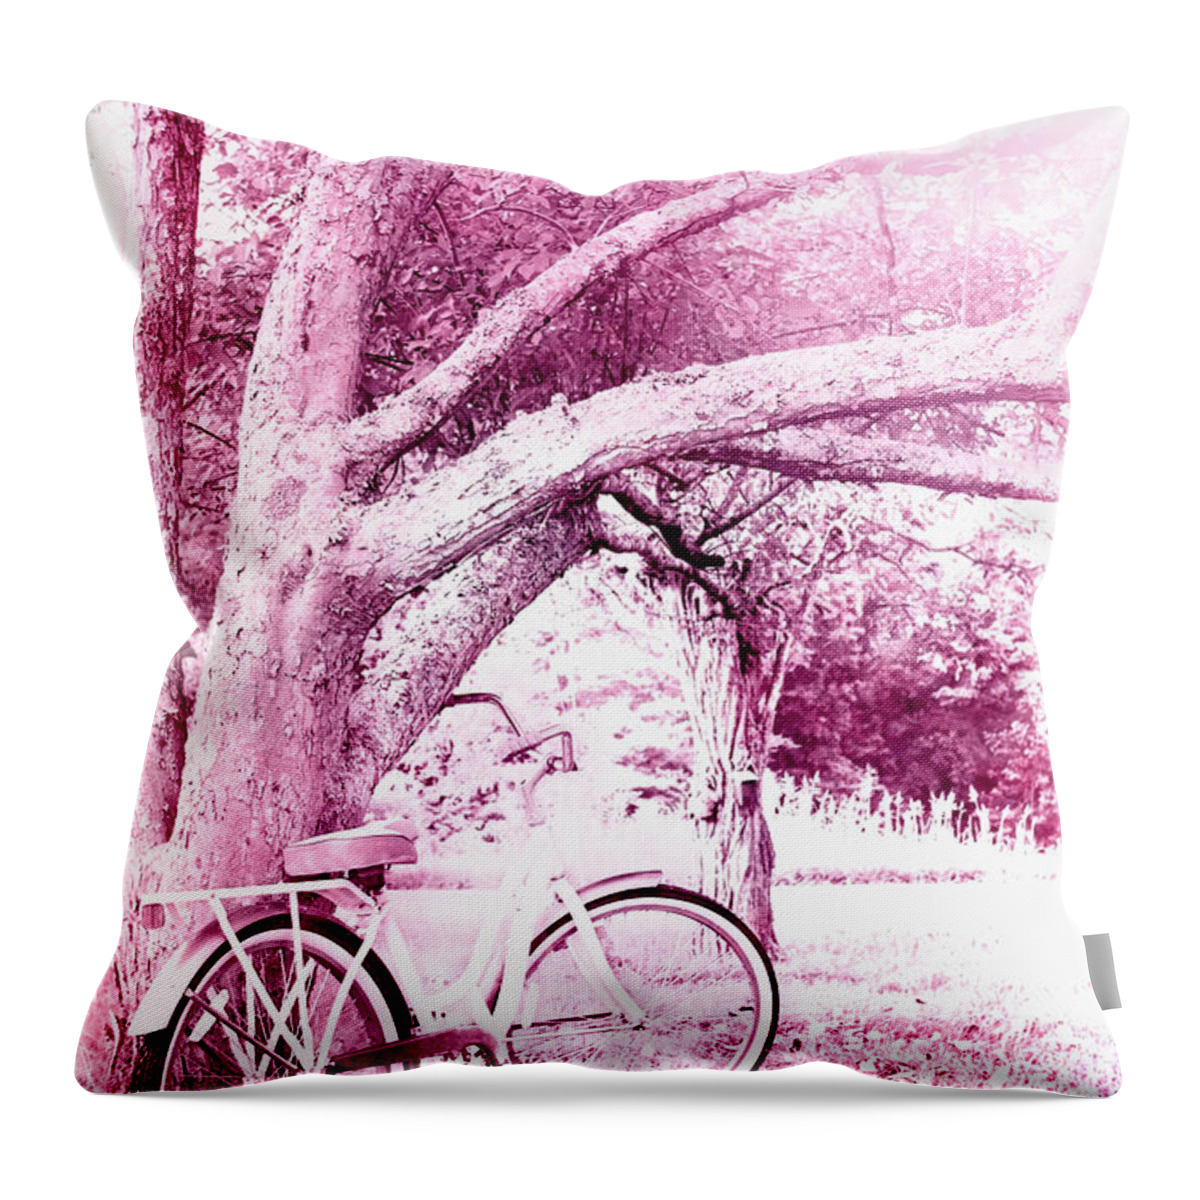 Lens Flare Throw Pillow featuring the photograph Pink Bicycle by Stephanie Frey